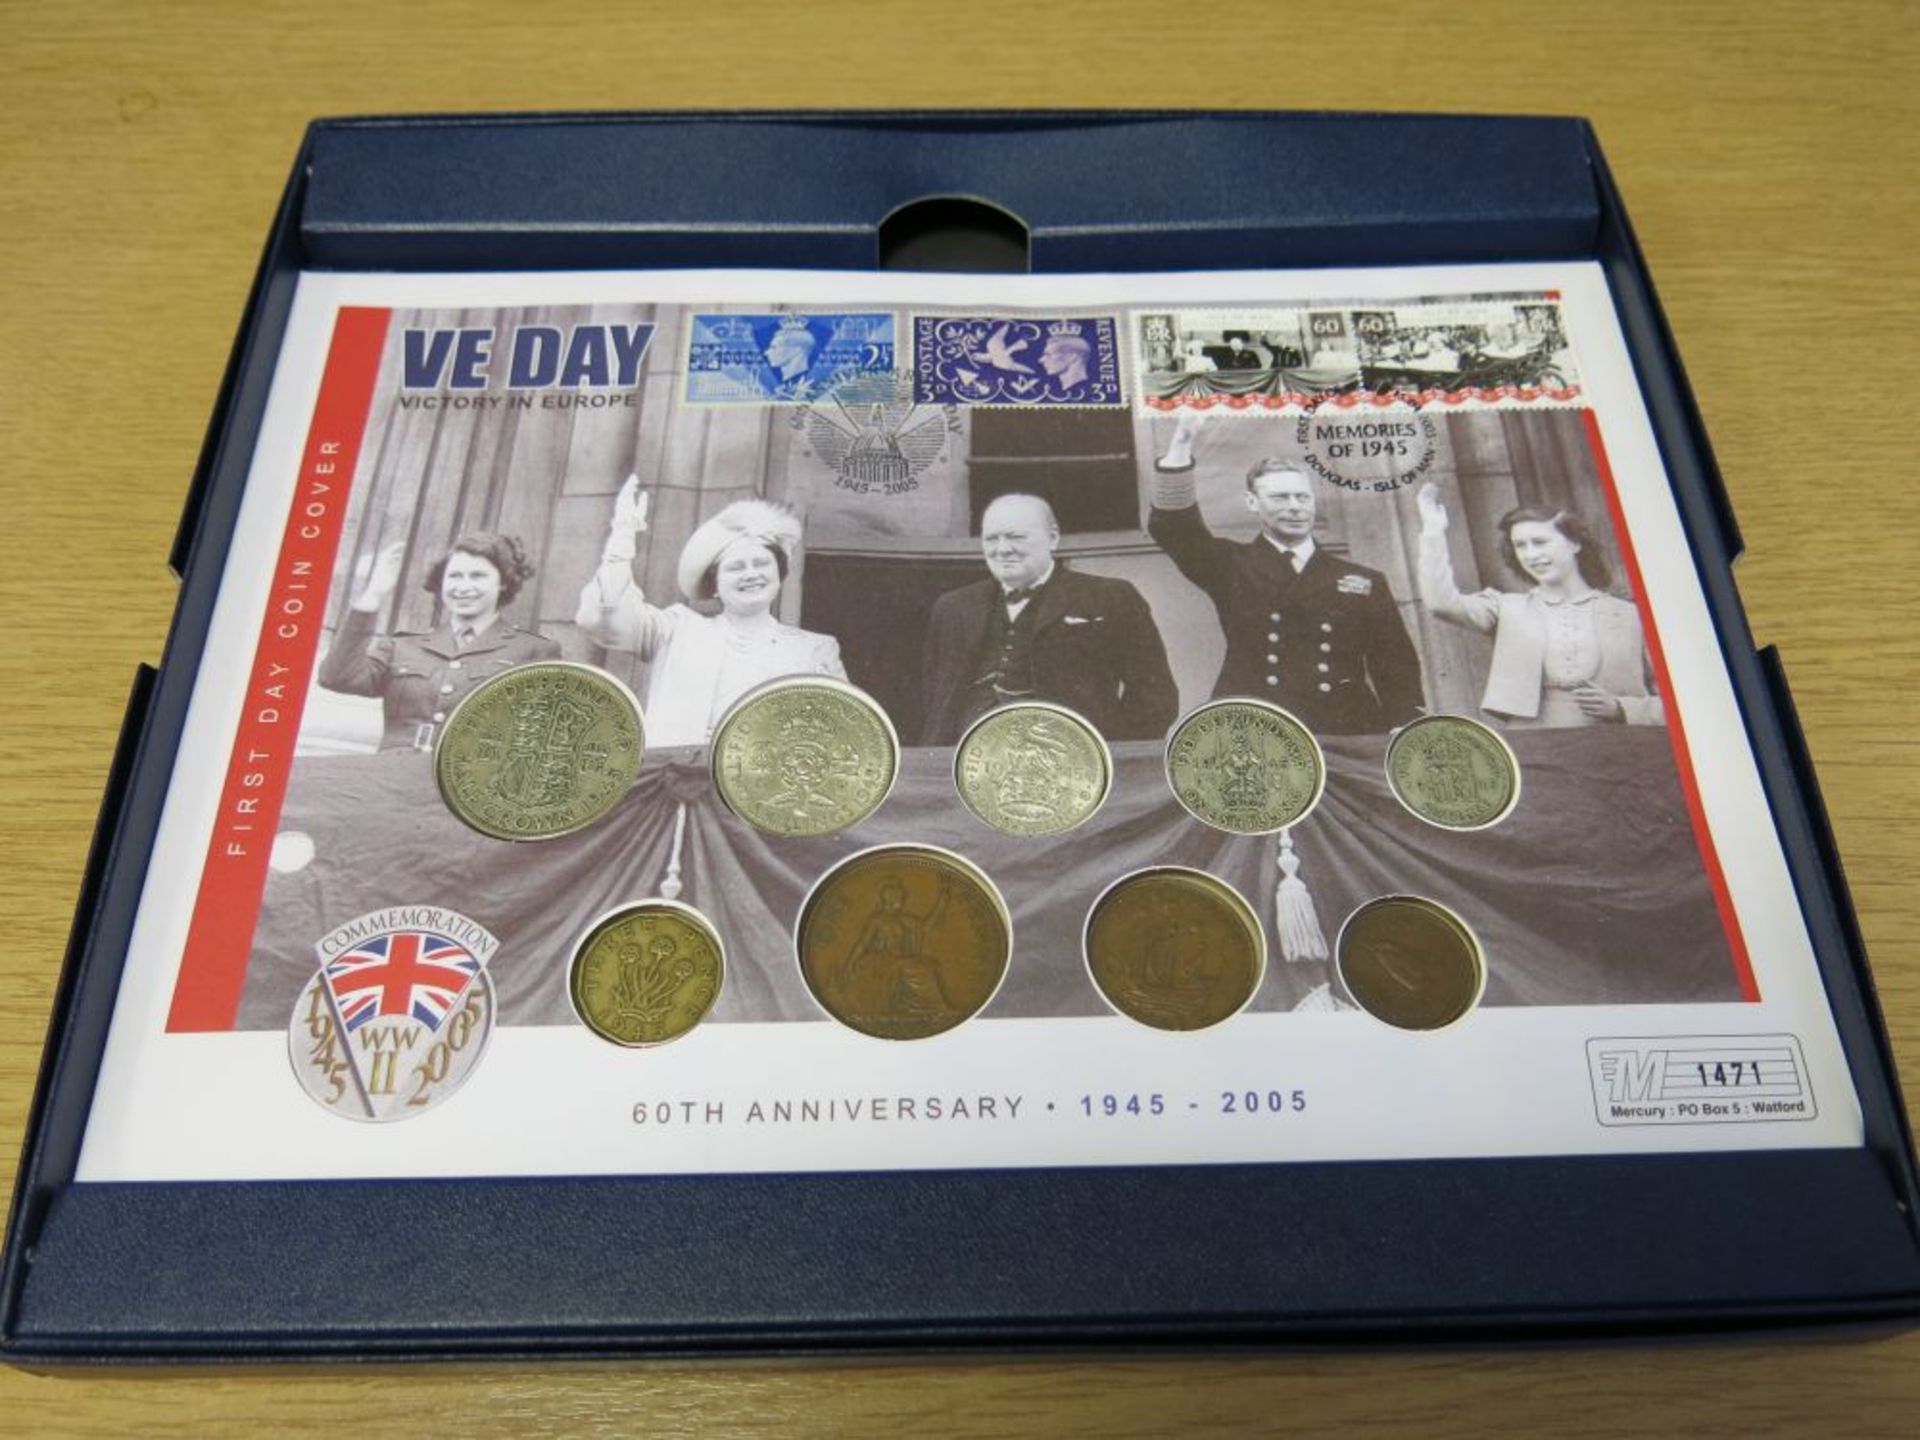 Commemorative Coin Sets - VE Day 60th Anniversary 2005, 'The Three Kings' Coin & First Day Cover, ' - Image 12 of 12